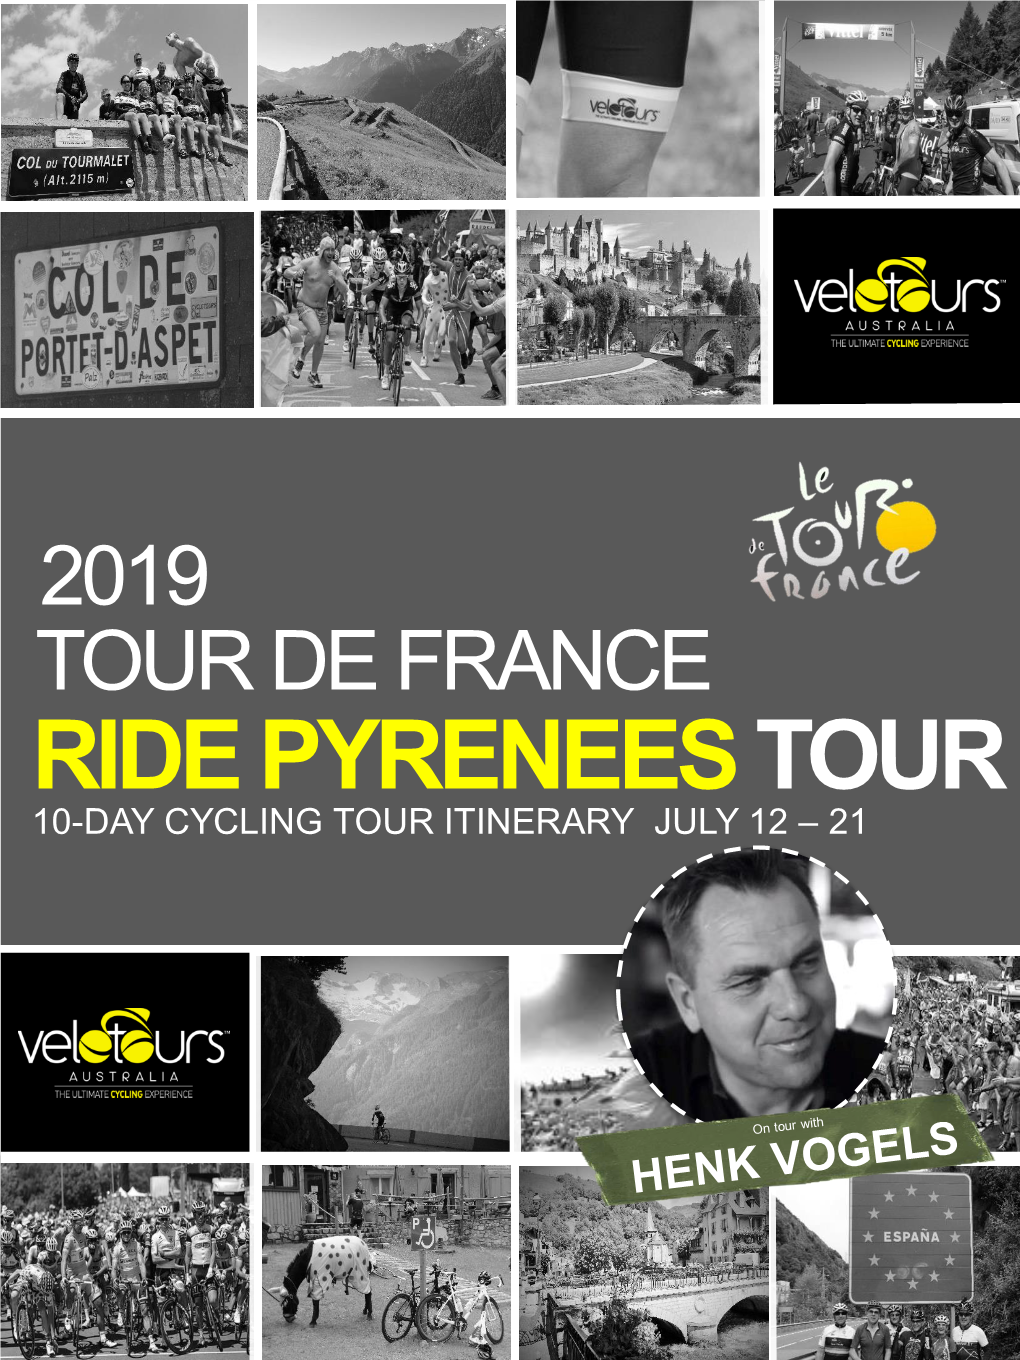 Ride Pyrenees Tour 10-Day Cycling Tour Itinerary July 12 – 21 Content